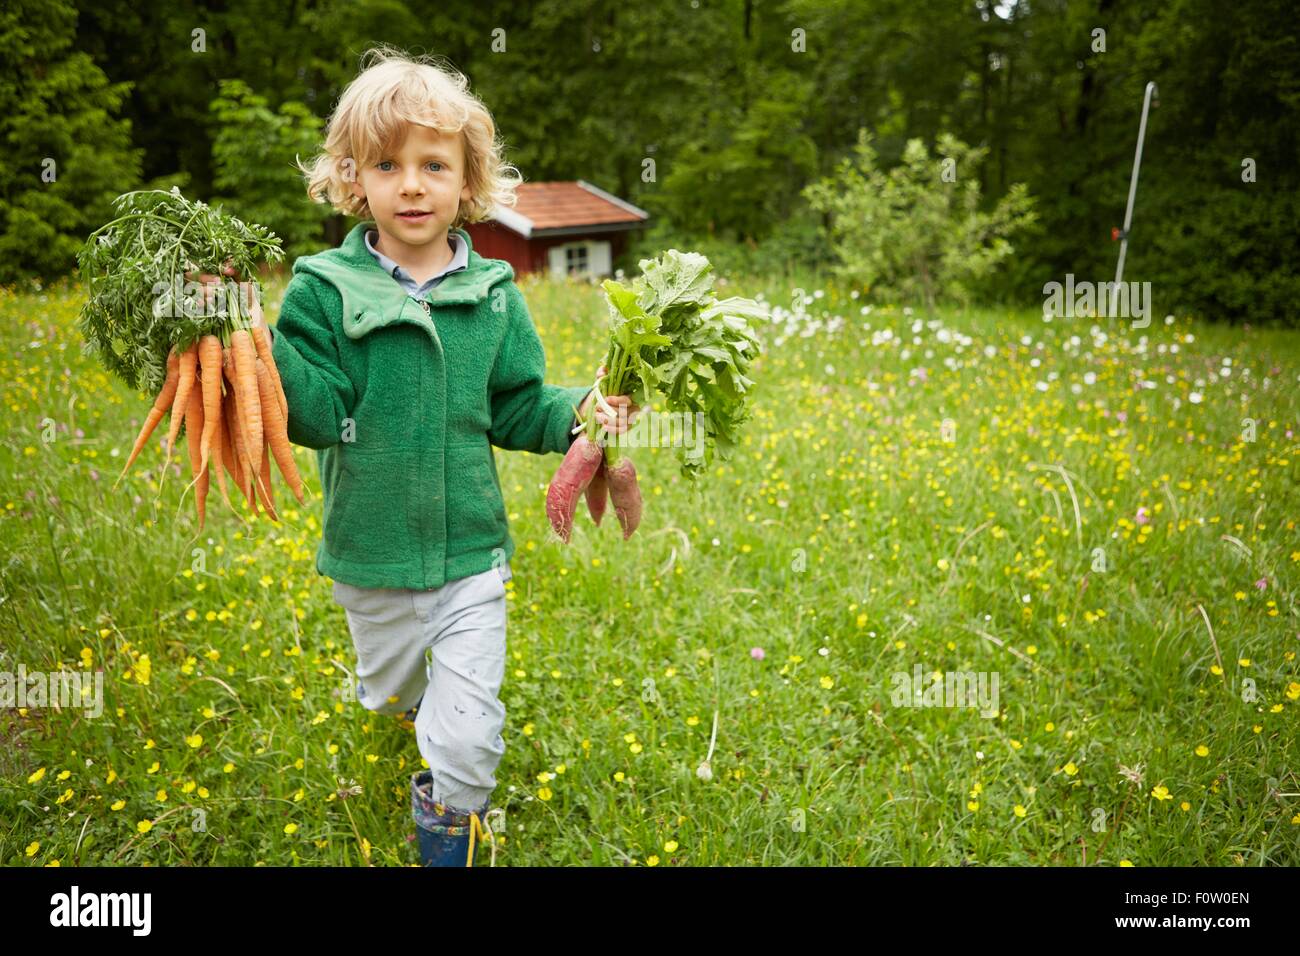 Portrait of boy carrying bunches of carrots across garden Stock Photo